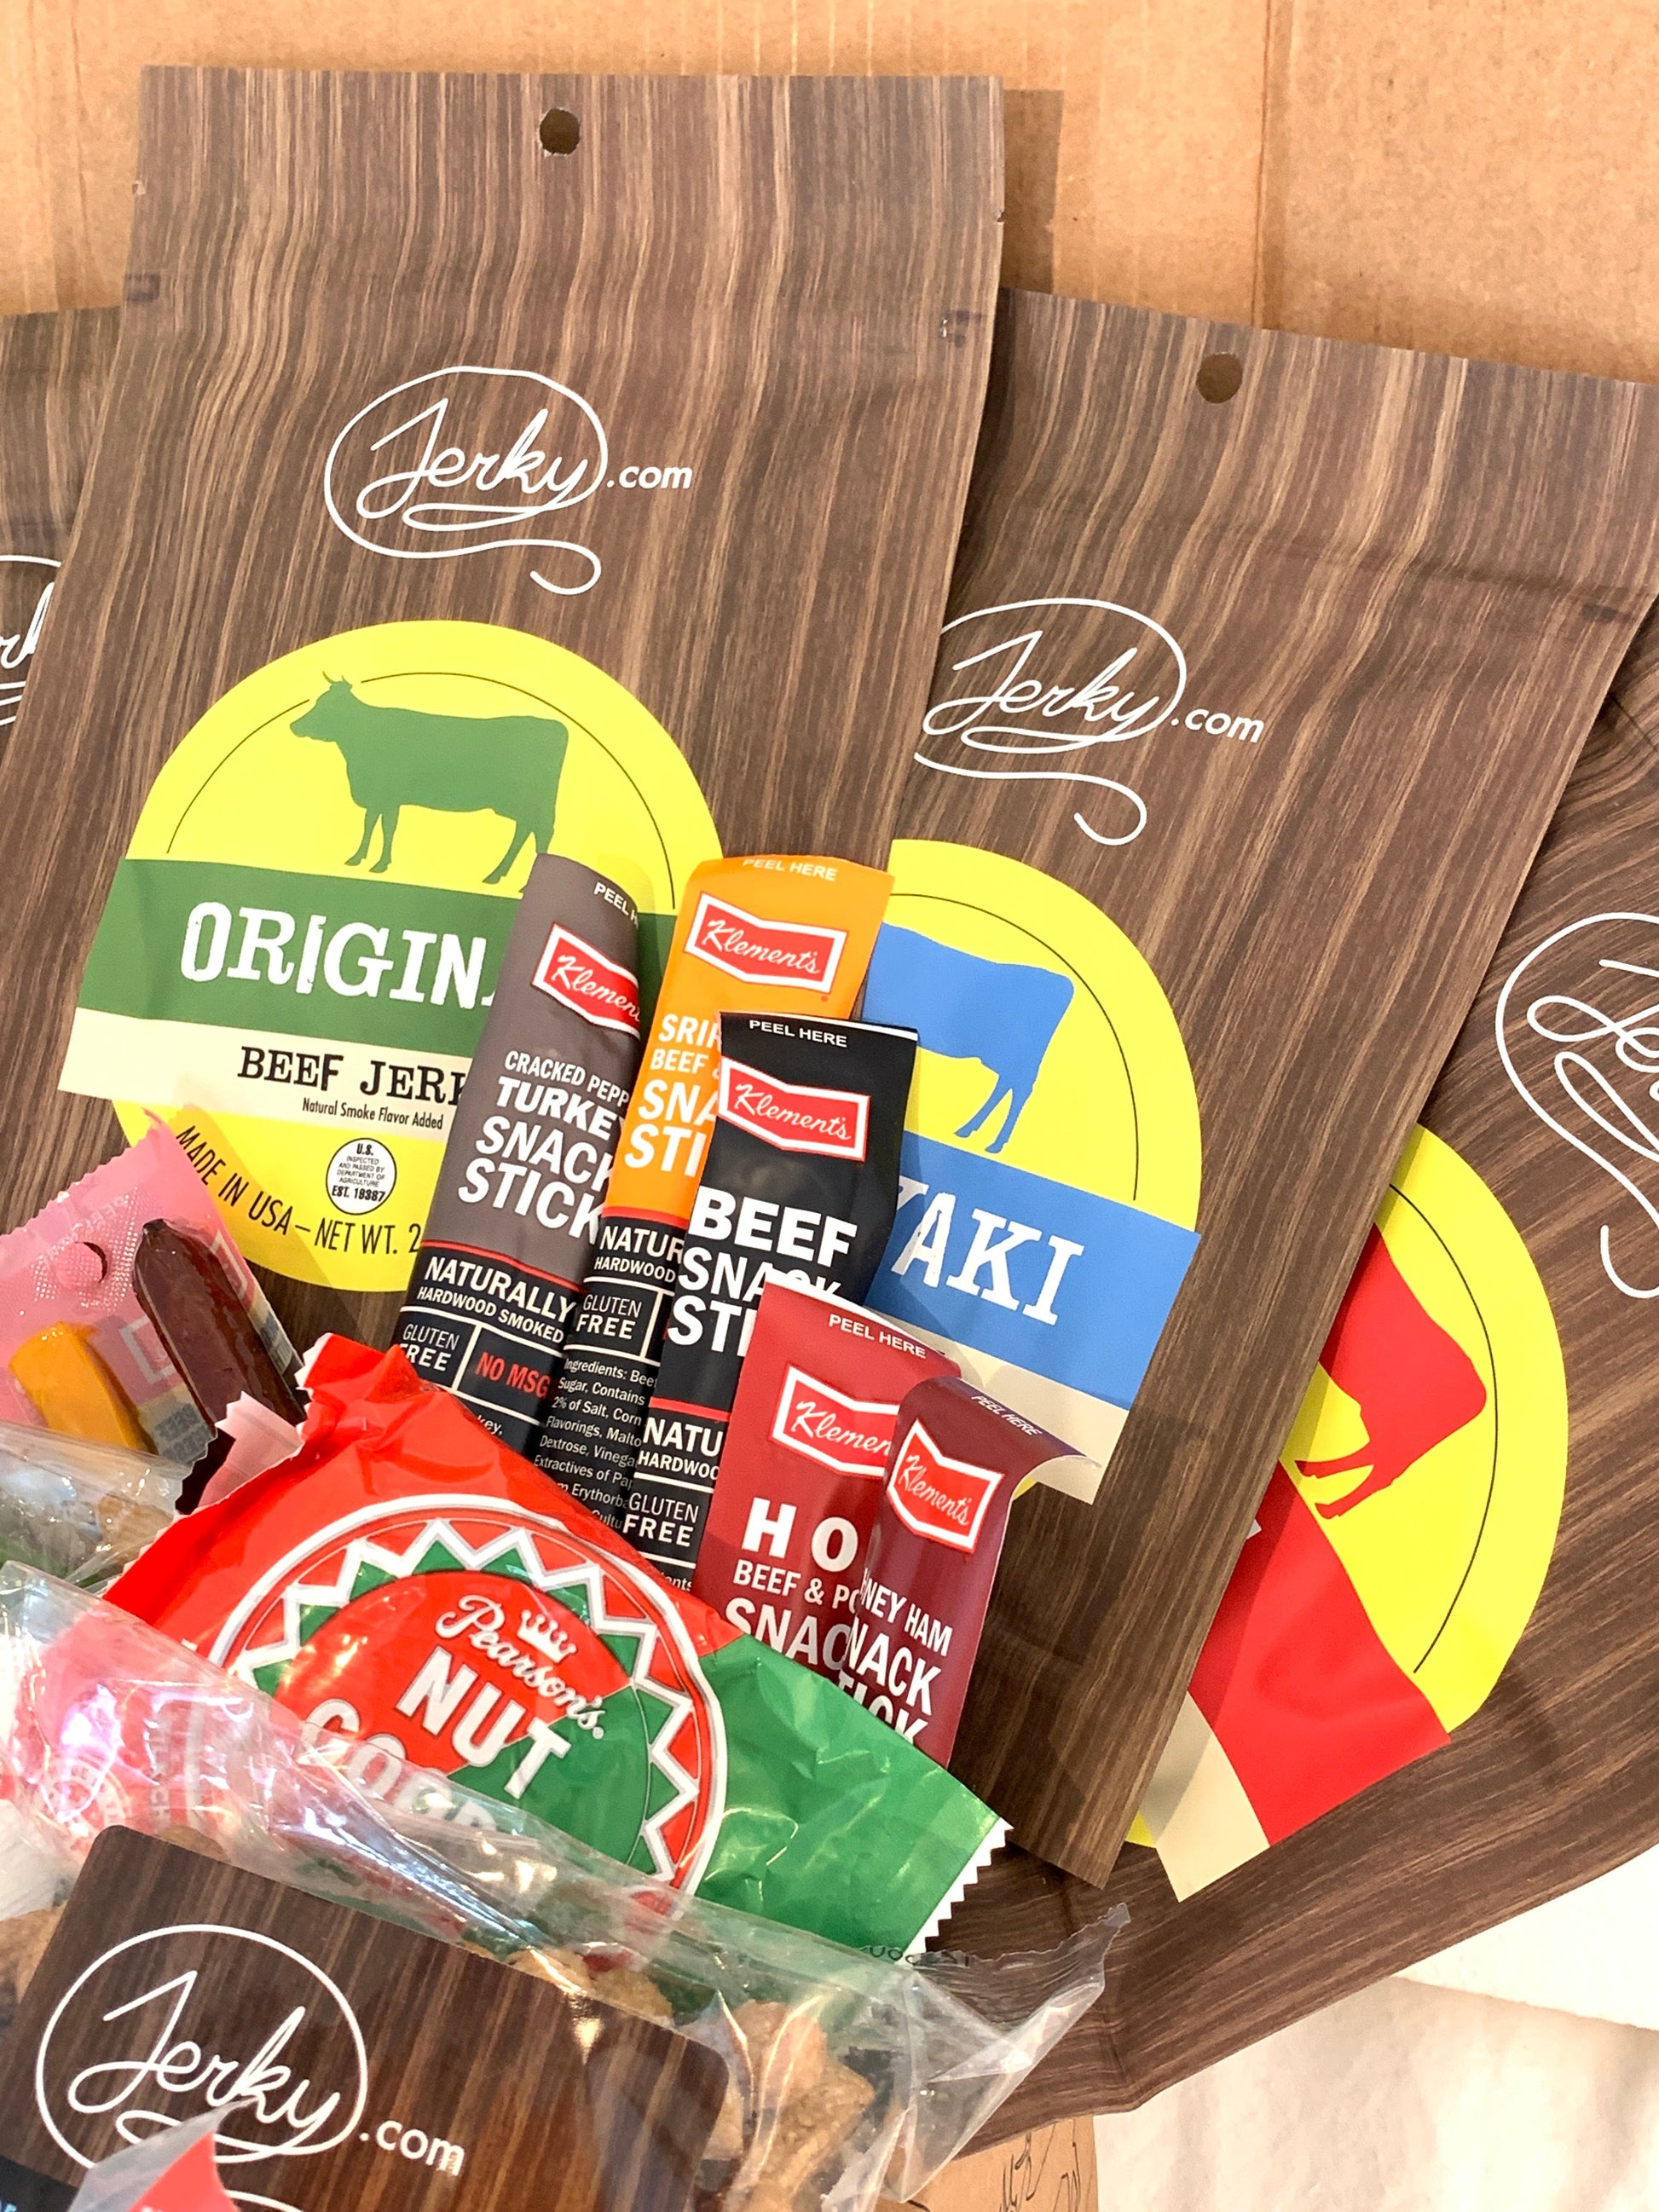 Snack Lover's Gift Box by Jerky.com